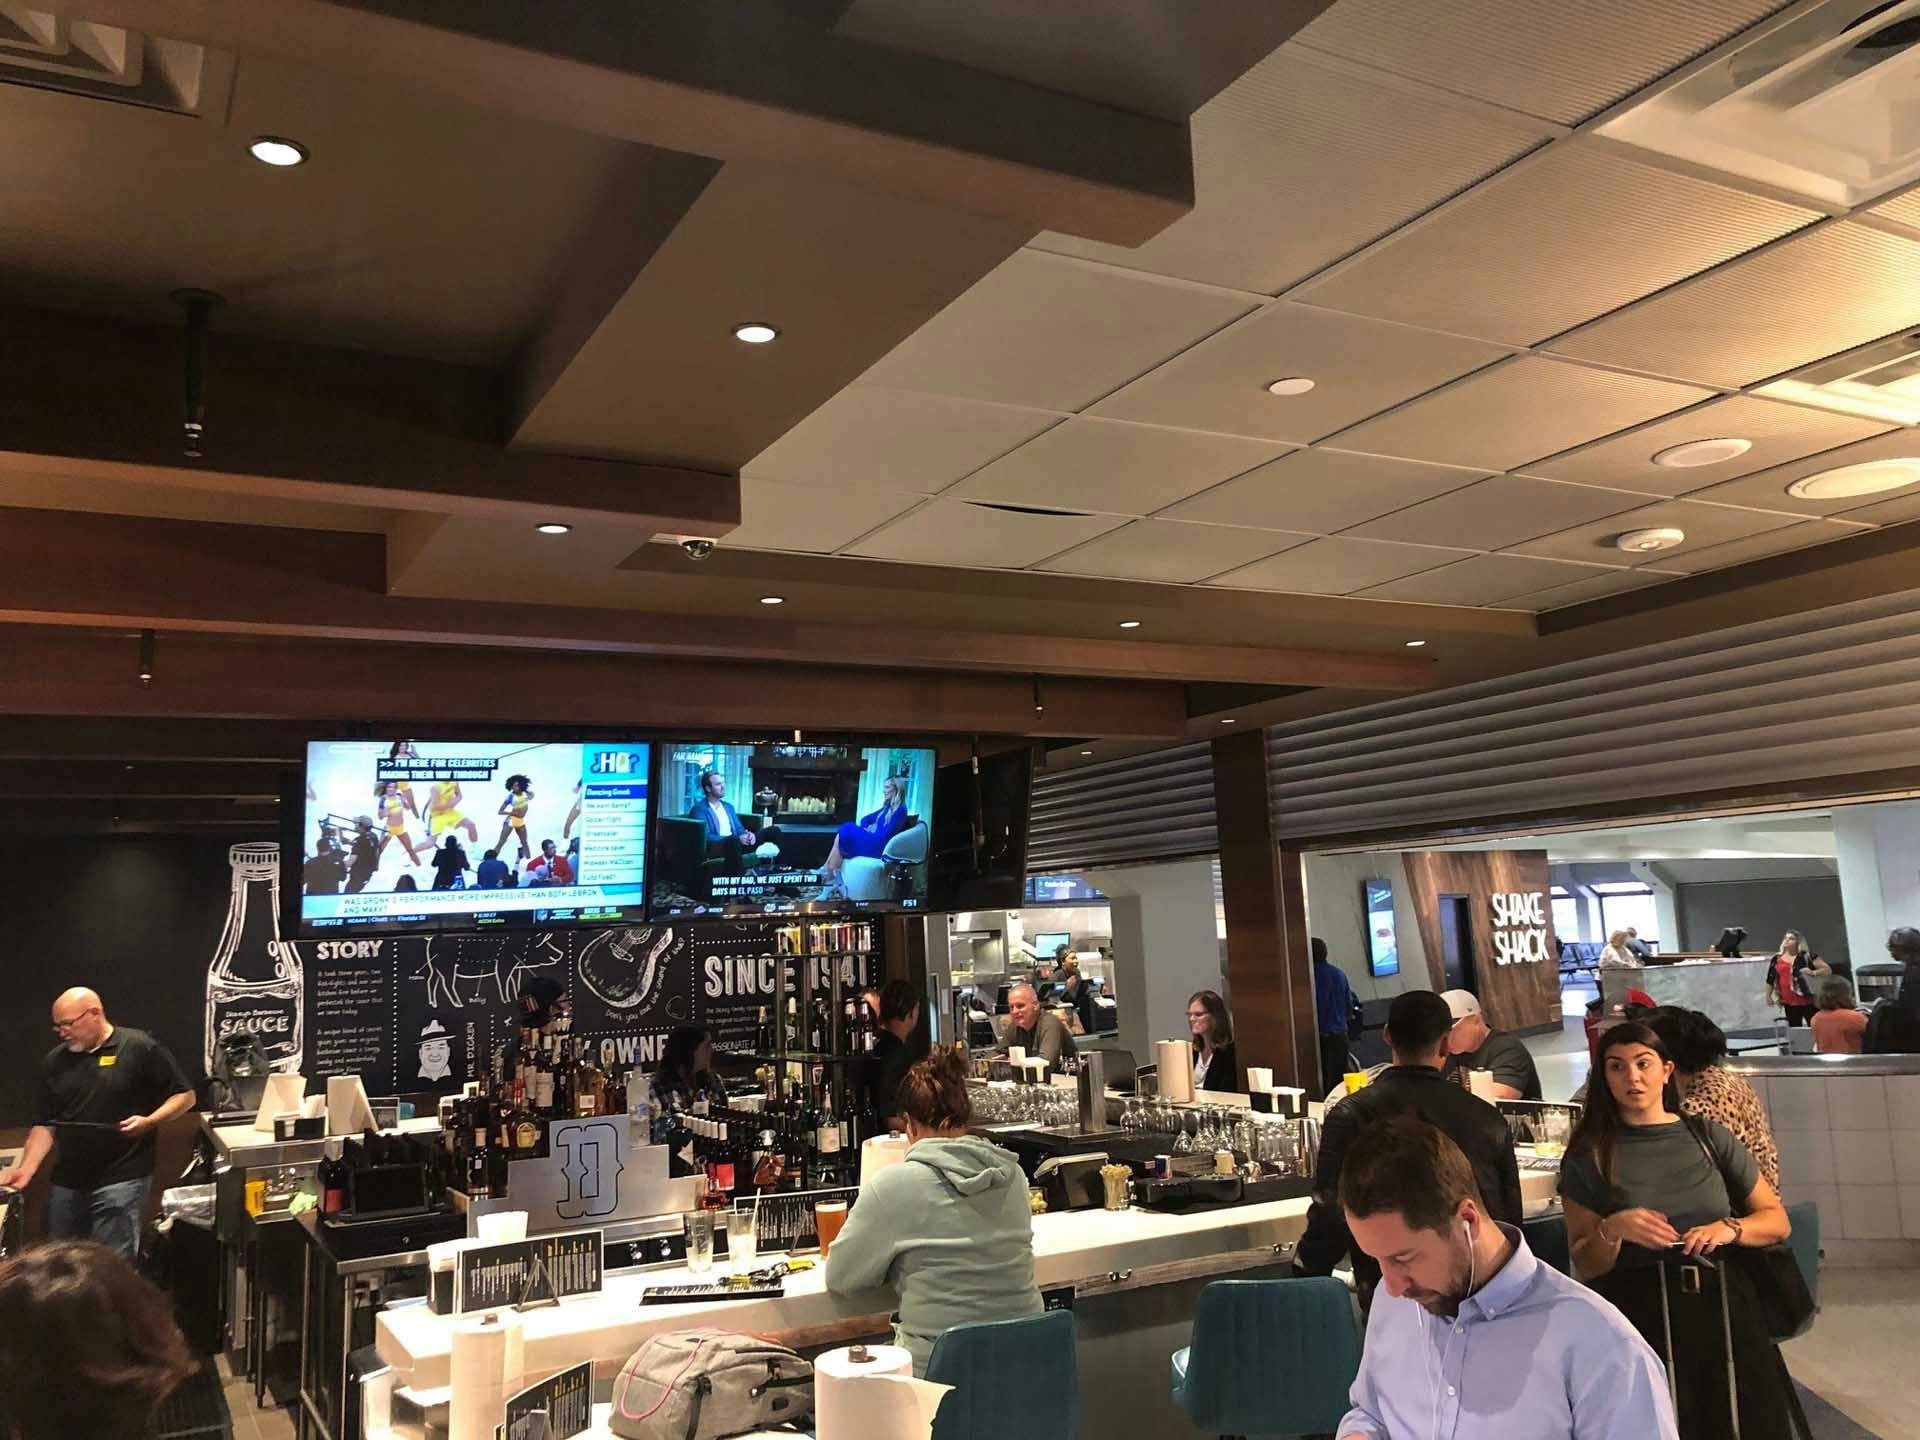 Franchising.com: Dickey’s Barbecue Pit Lands at DFW Airport with a Full Bar